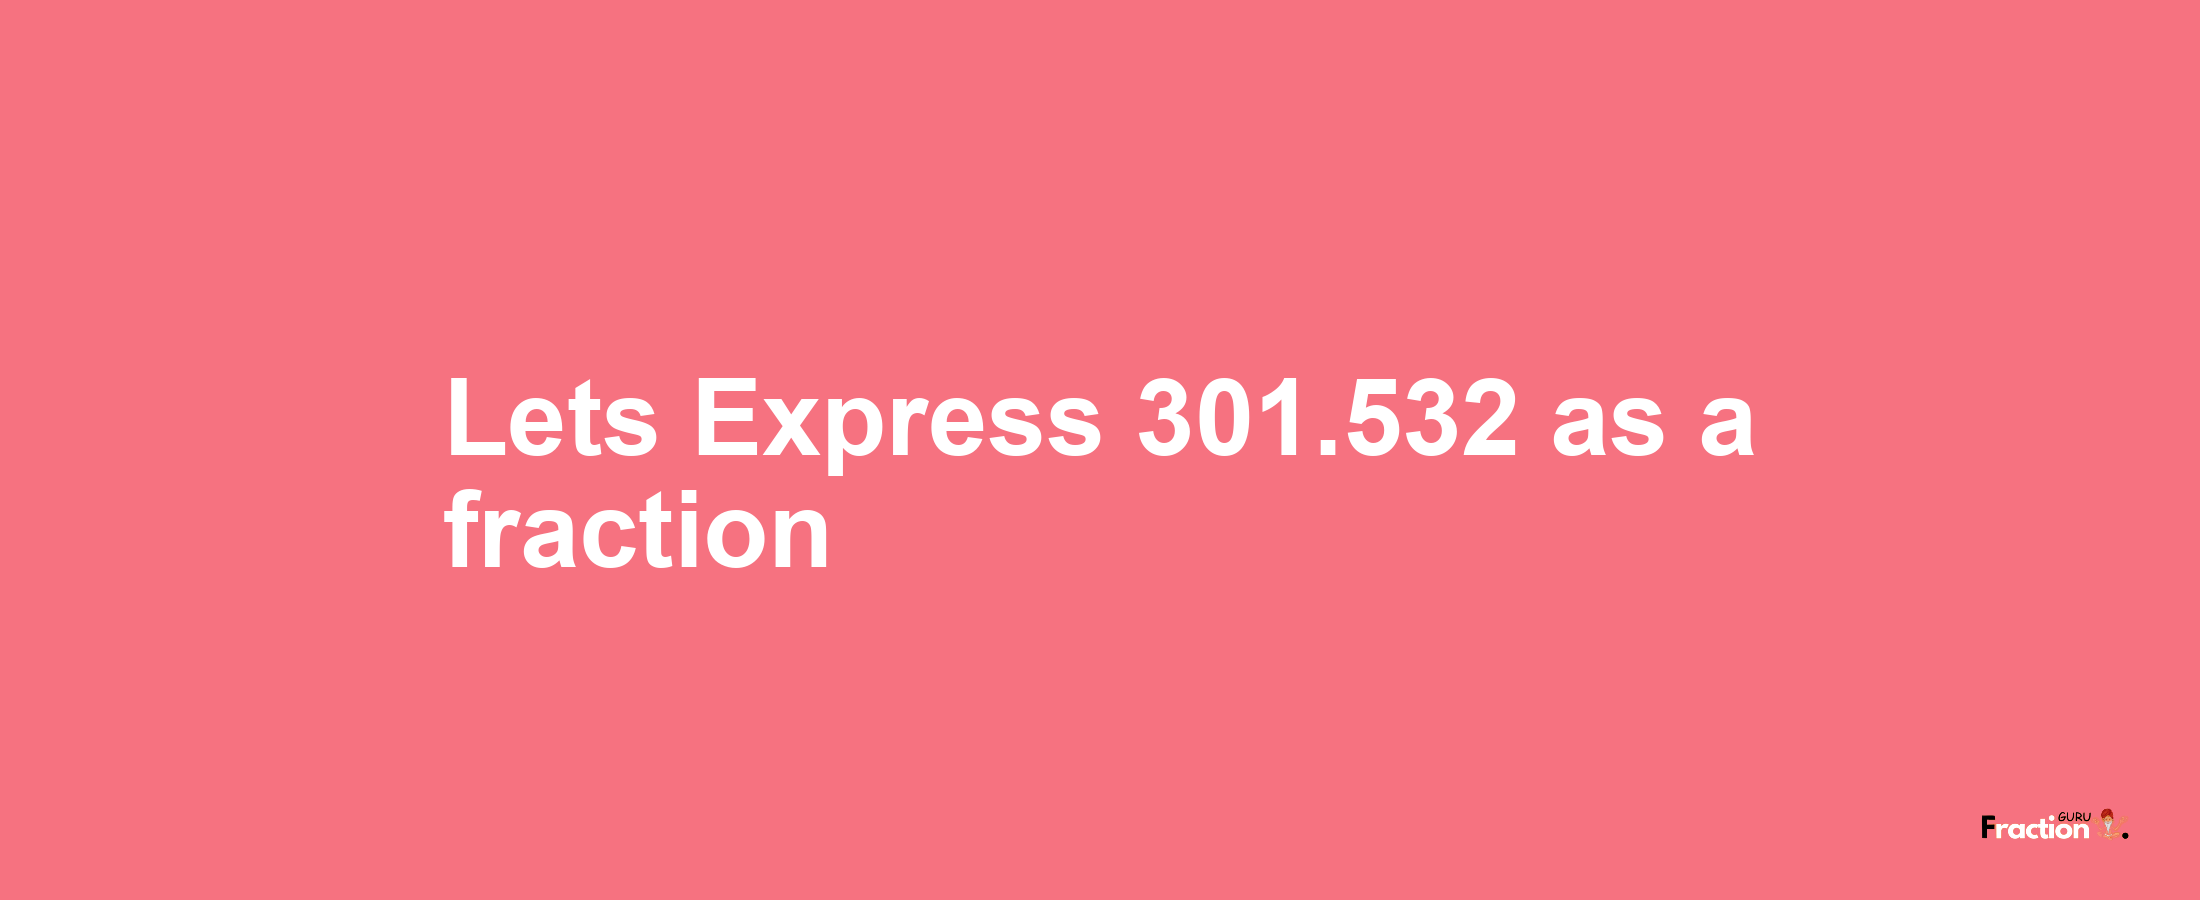 Lets Express 301.532 as afraction